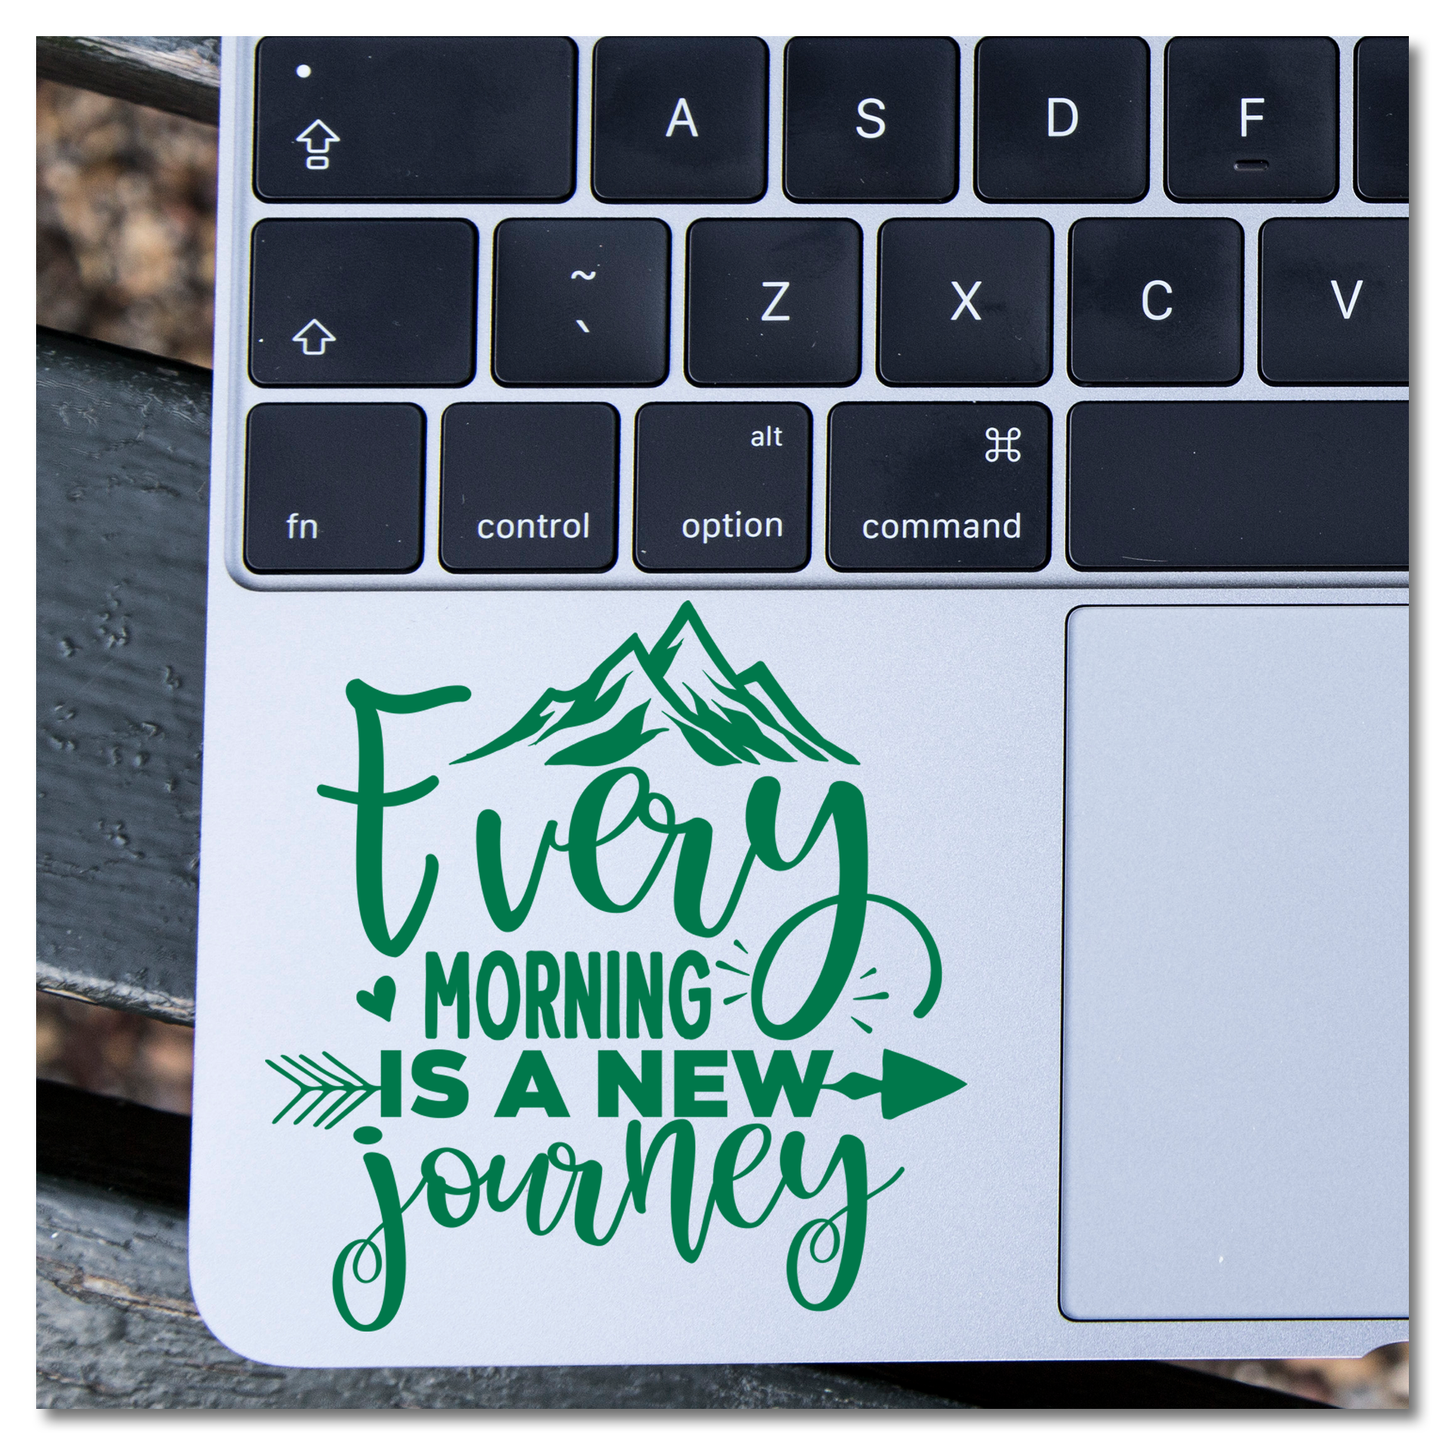 Every Morning Is A New Journey Vinyl Decal Sticker